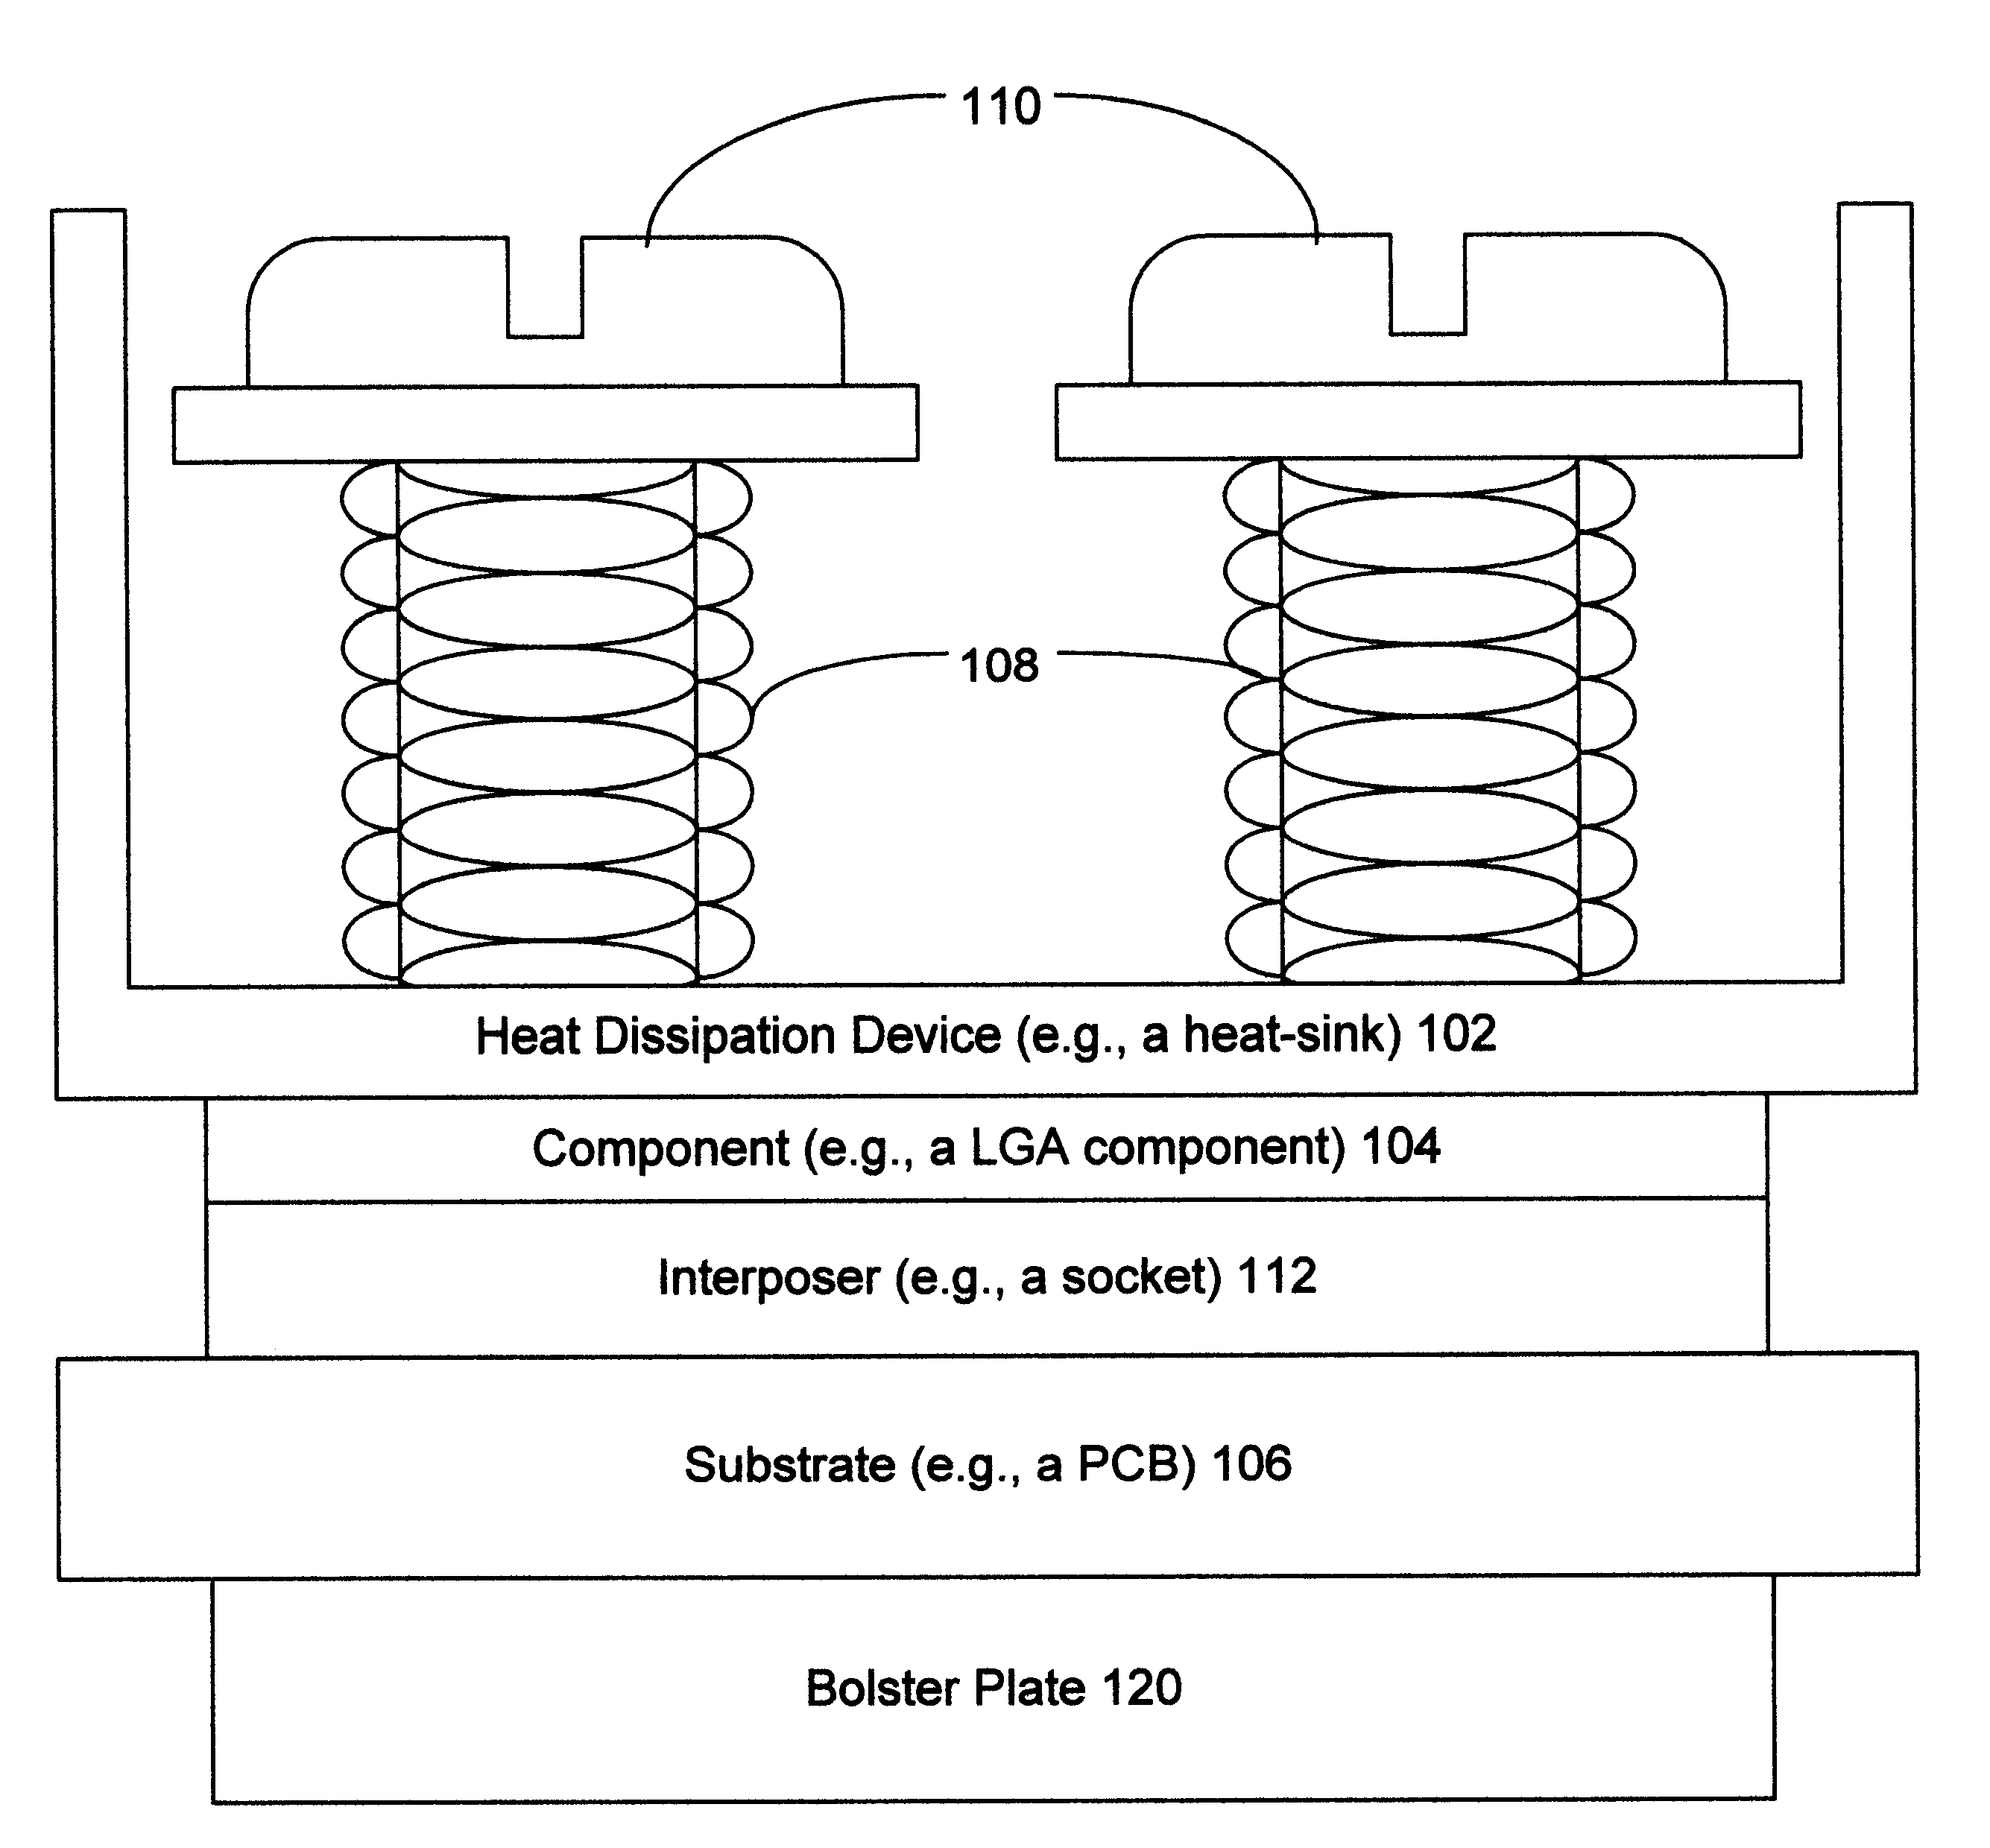 Mechanical loading of a land grid array component using a wave spring